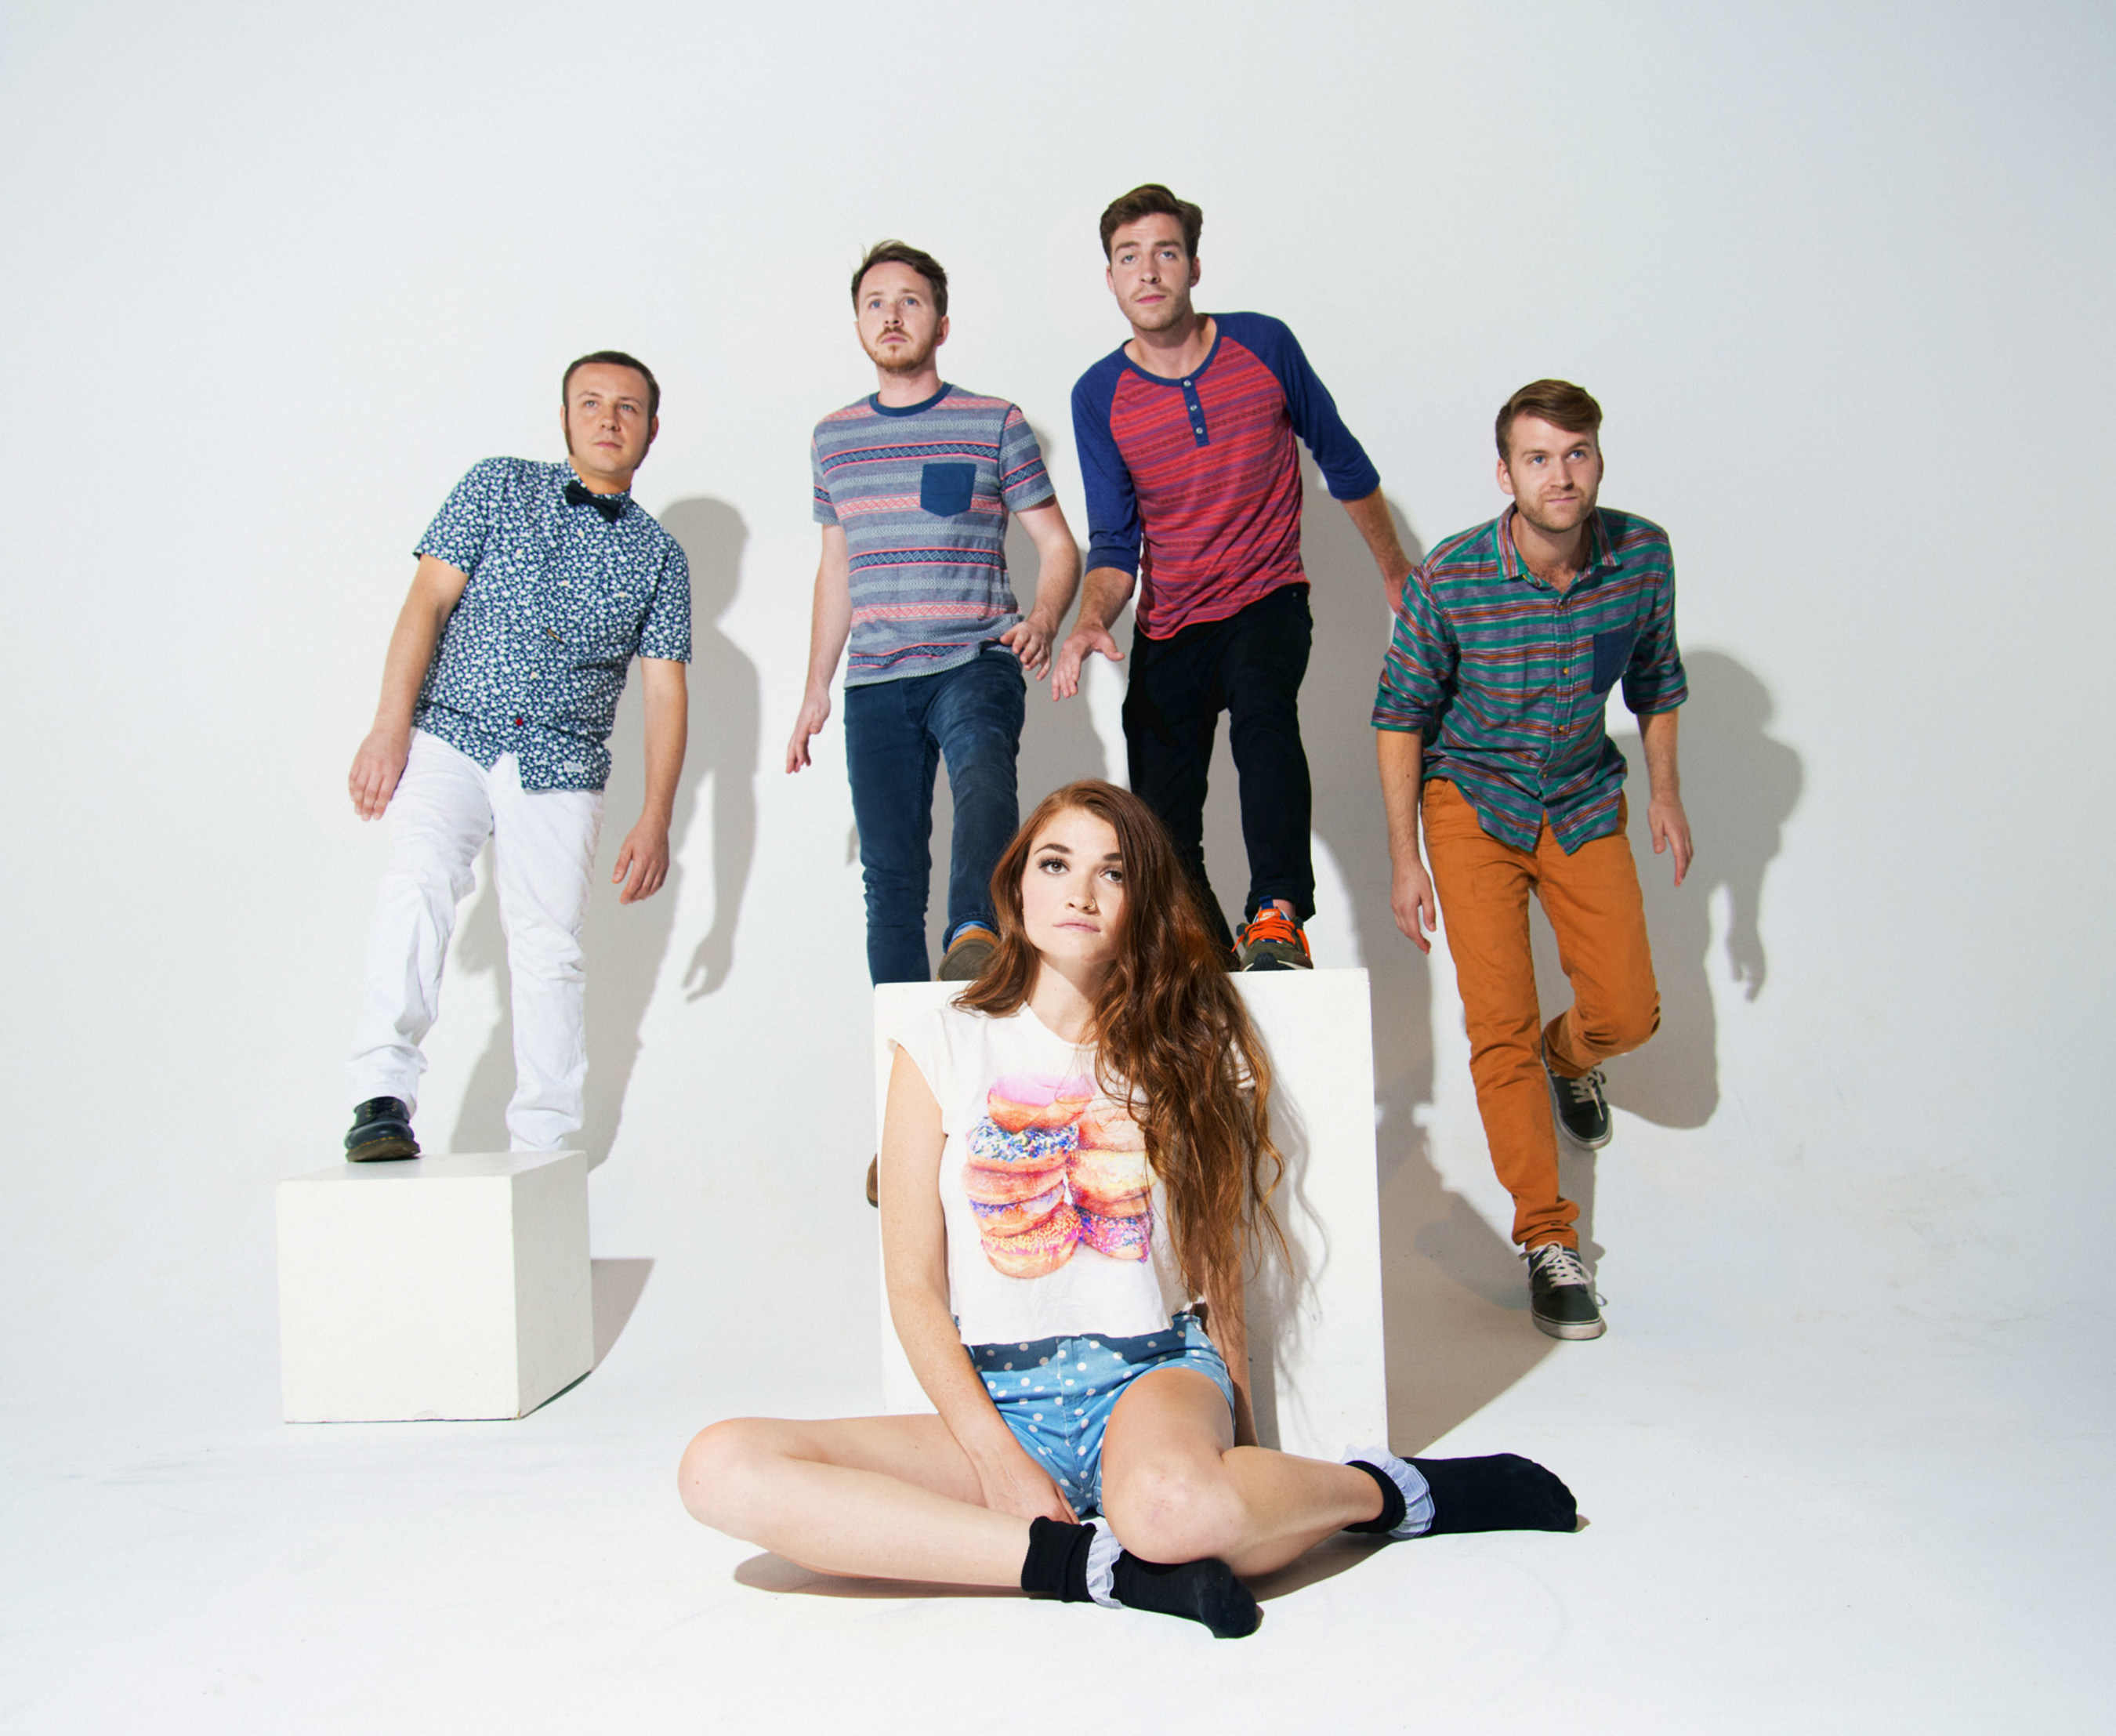 MisterWives is one of bands featured in Hard Rock Hotels & Casinos' in-room playlist as a part of the brand's free music amenity program, The Sound of Your Stay.